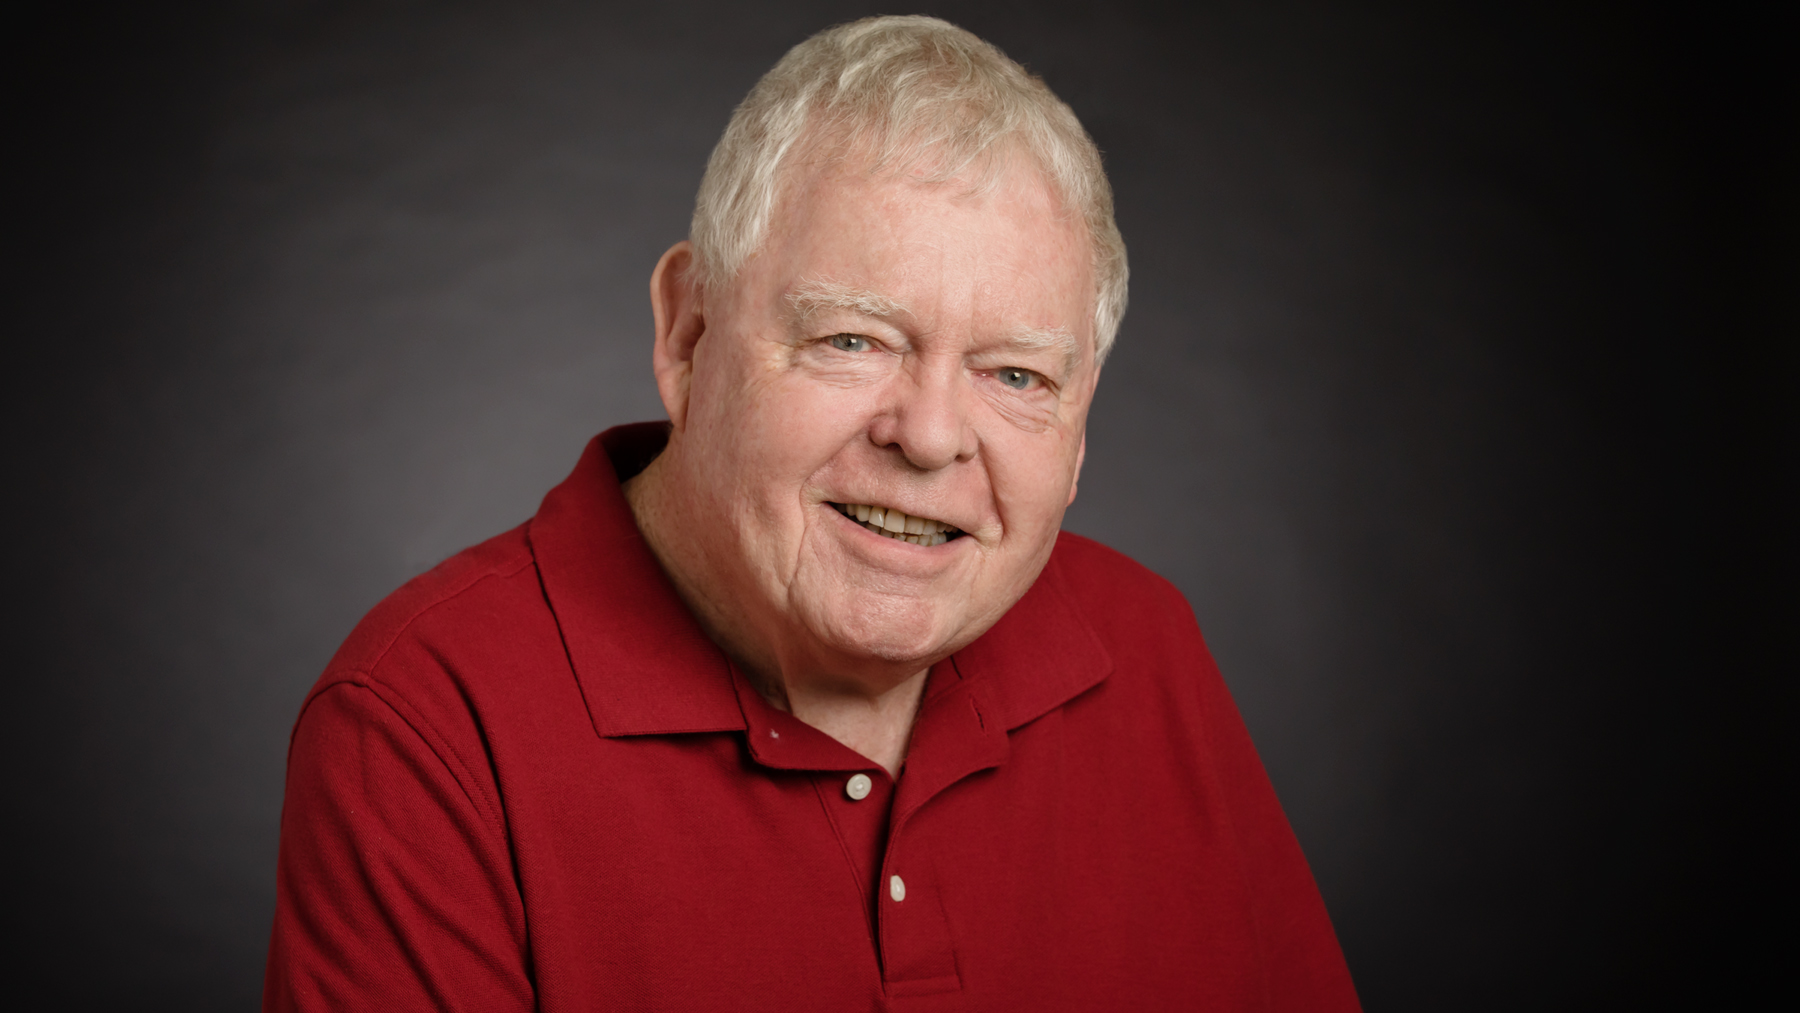 Kinesiology and community health professor emeritus Thomas O’Rourke weighs in on effective public education and legislative strategies for promoting gun safety in the U.S.  Photo by L. Brian Stauffer